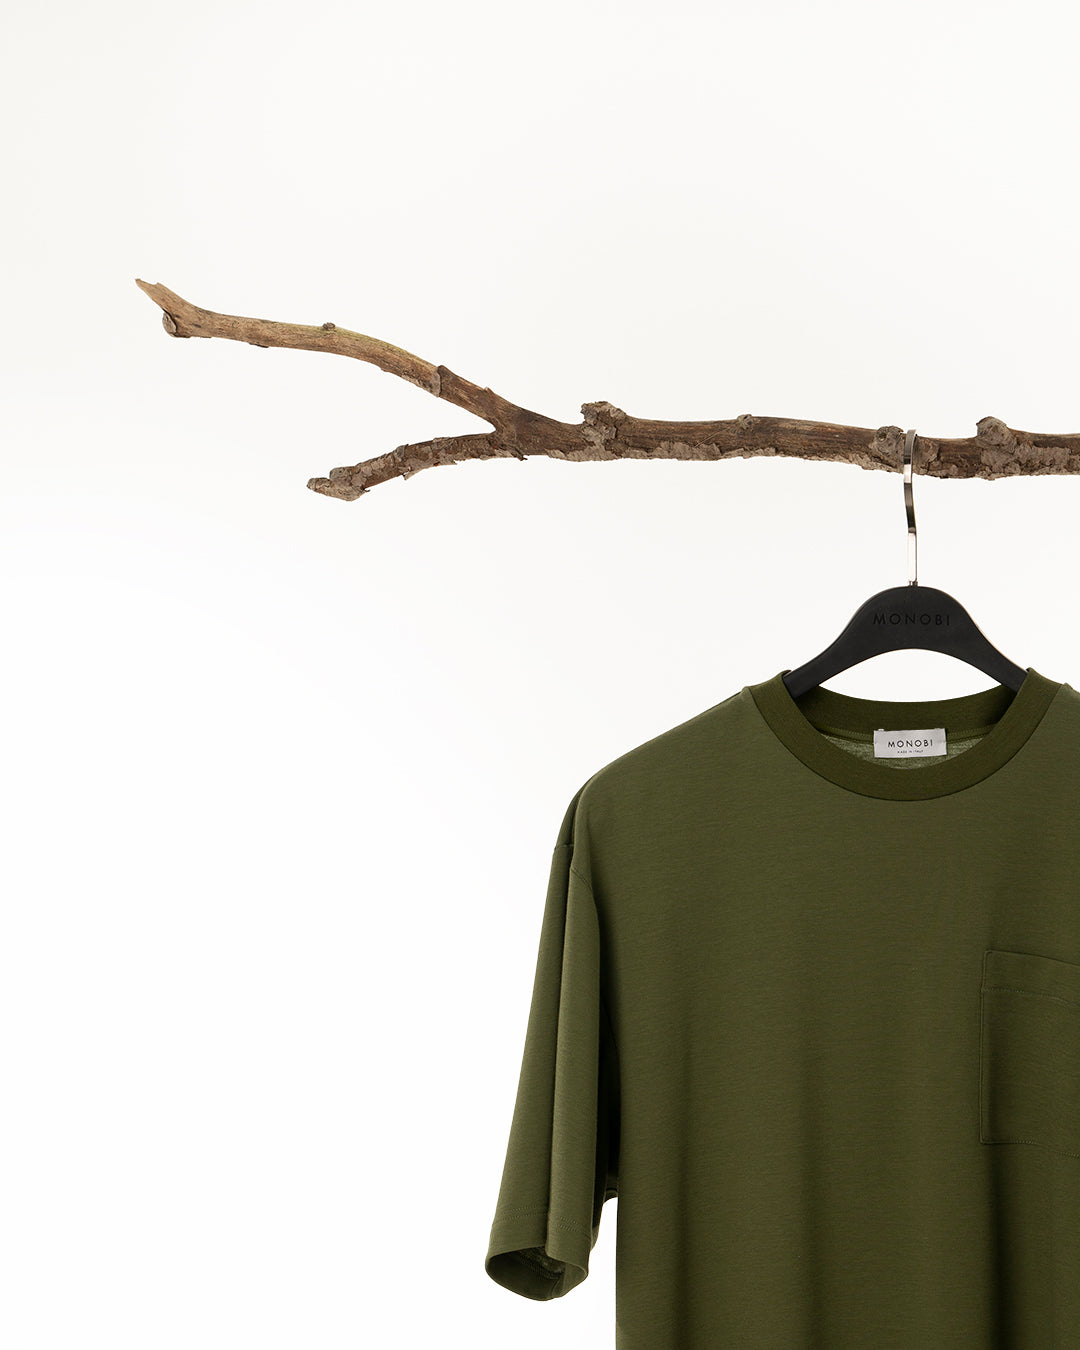 Green T-shirt hanging from a tree branch with a hanger